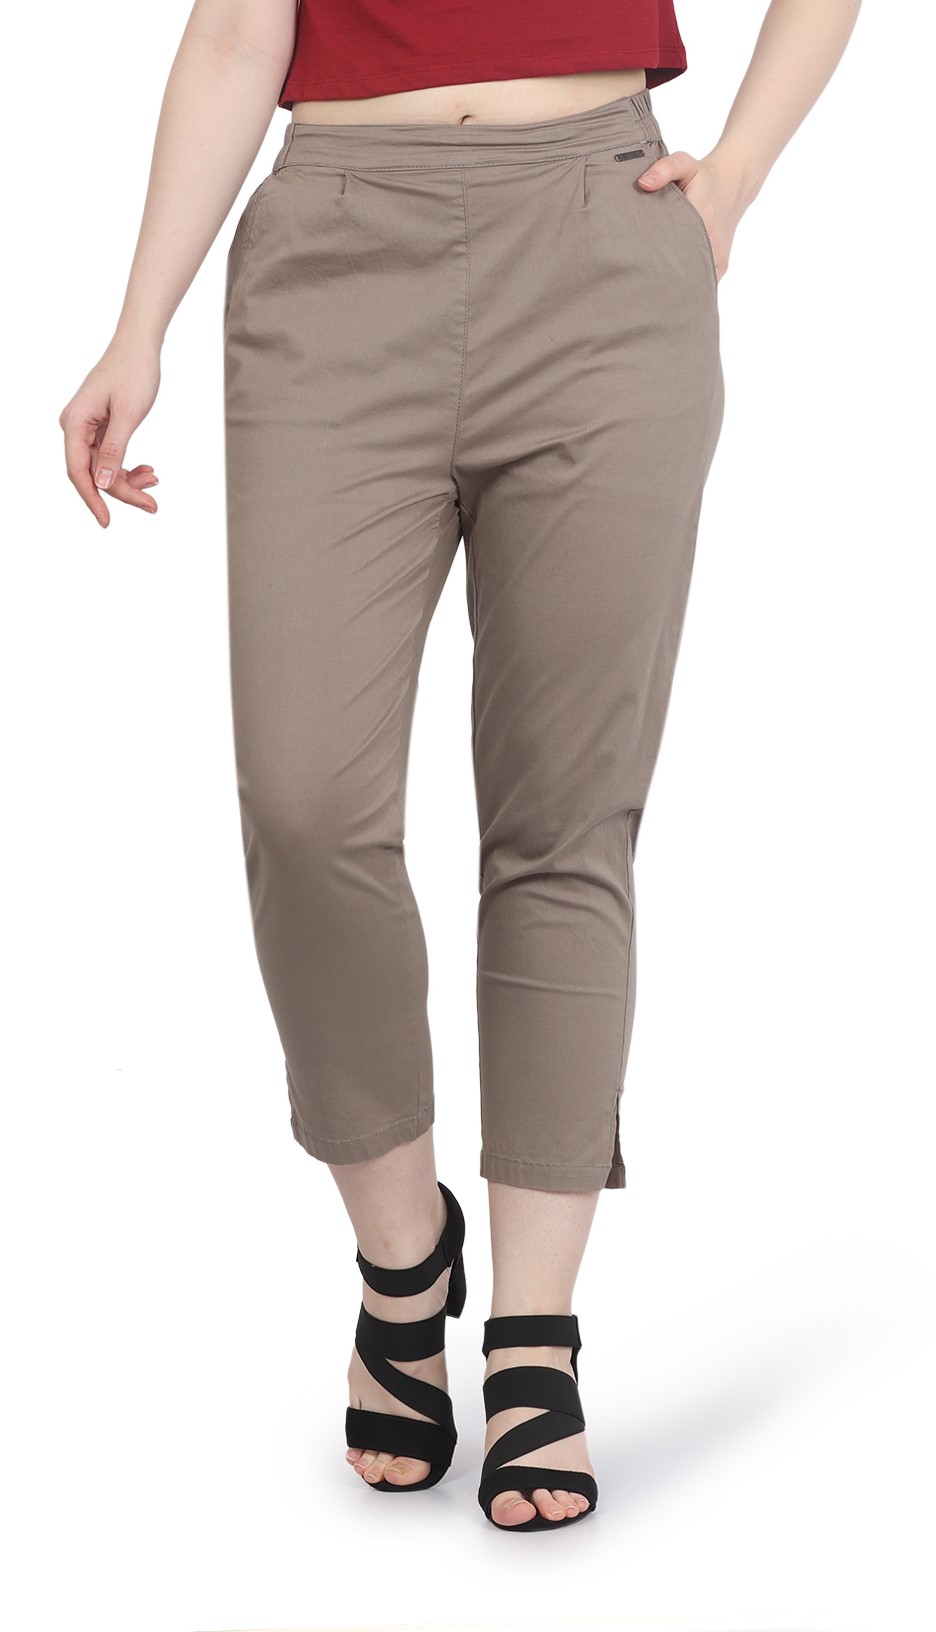 Ladies Ankle Length Pants Manufacturers | Women Ankle Length Pants  Suppliers Exporters